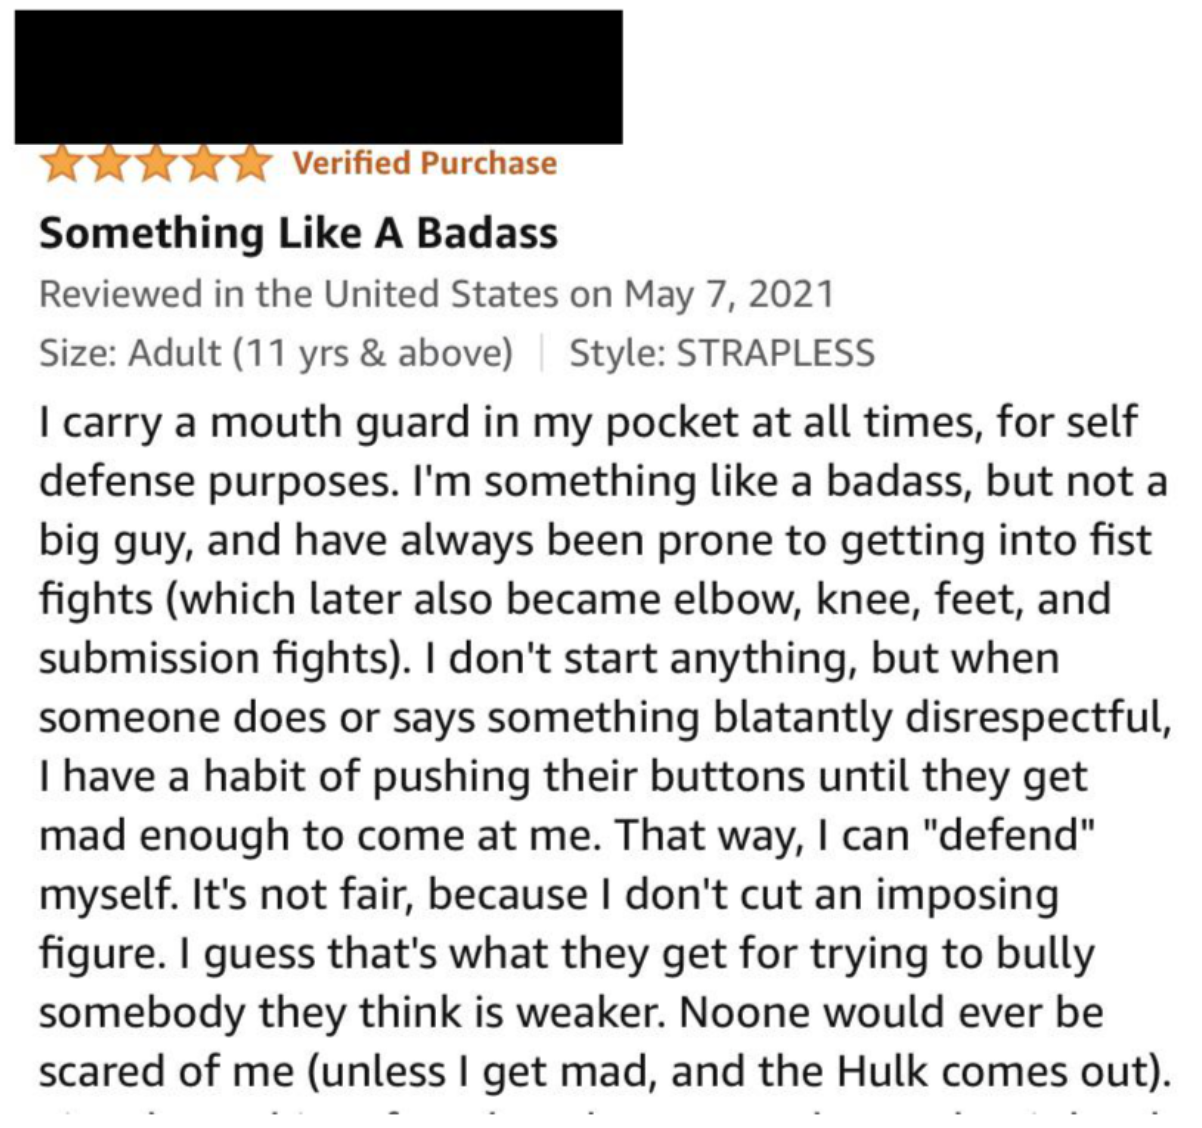 the review on amazon